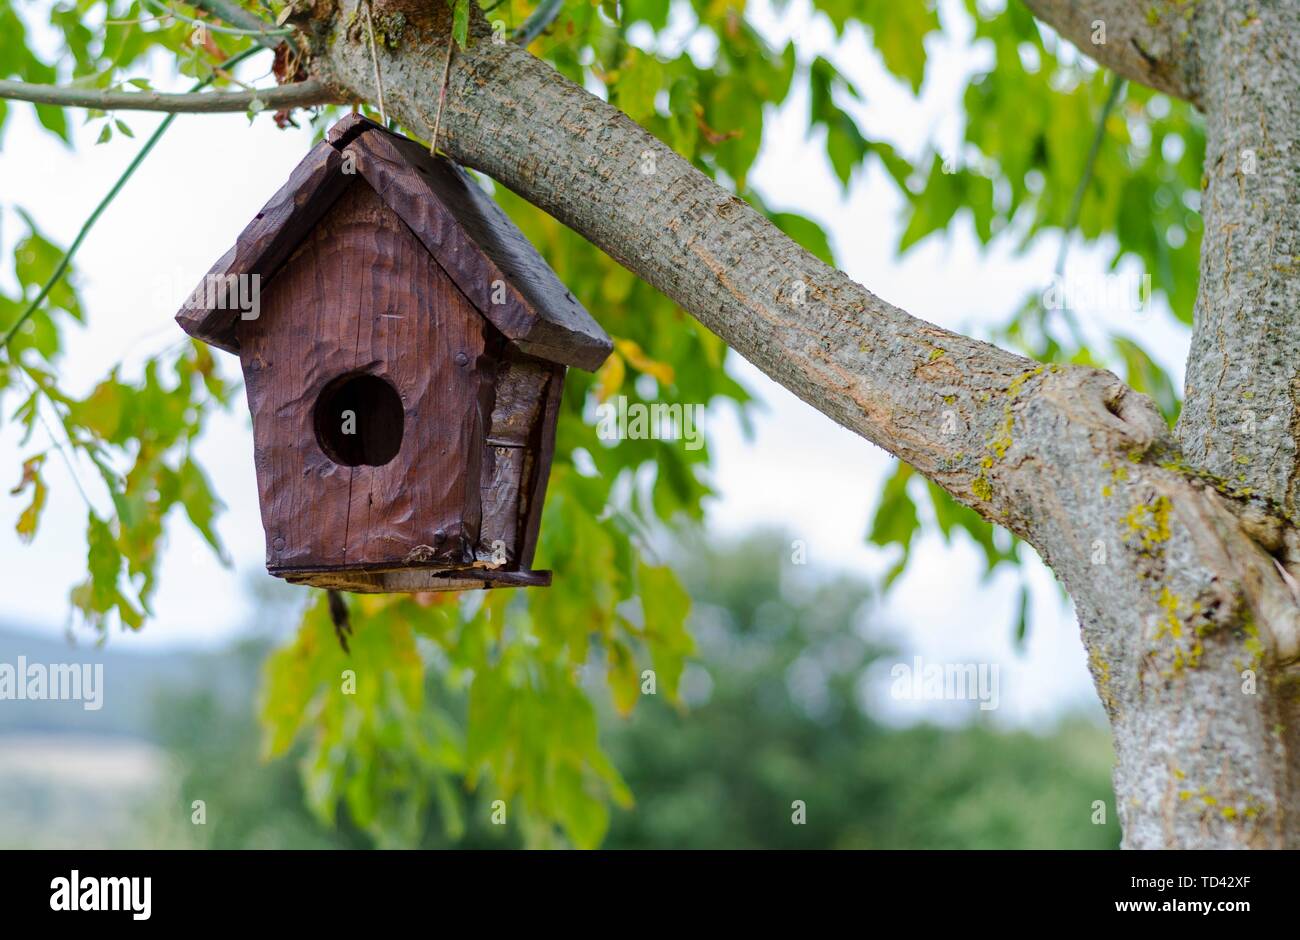 Pretty little wooden house for birds Stock Photo